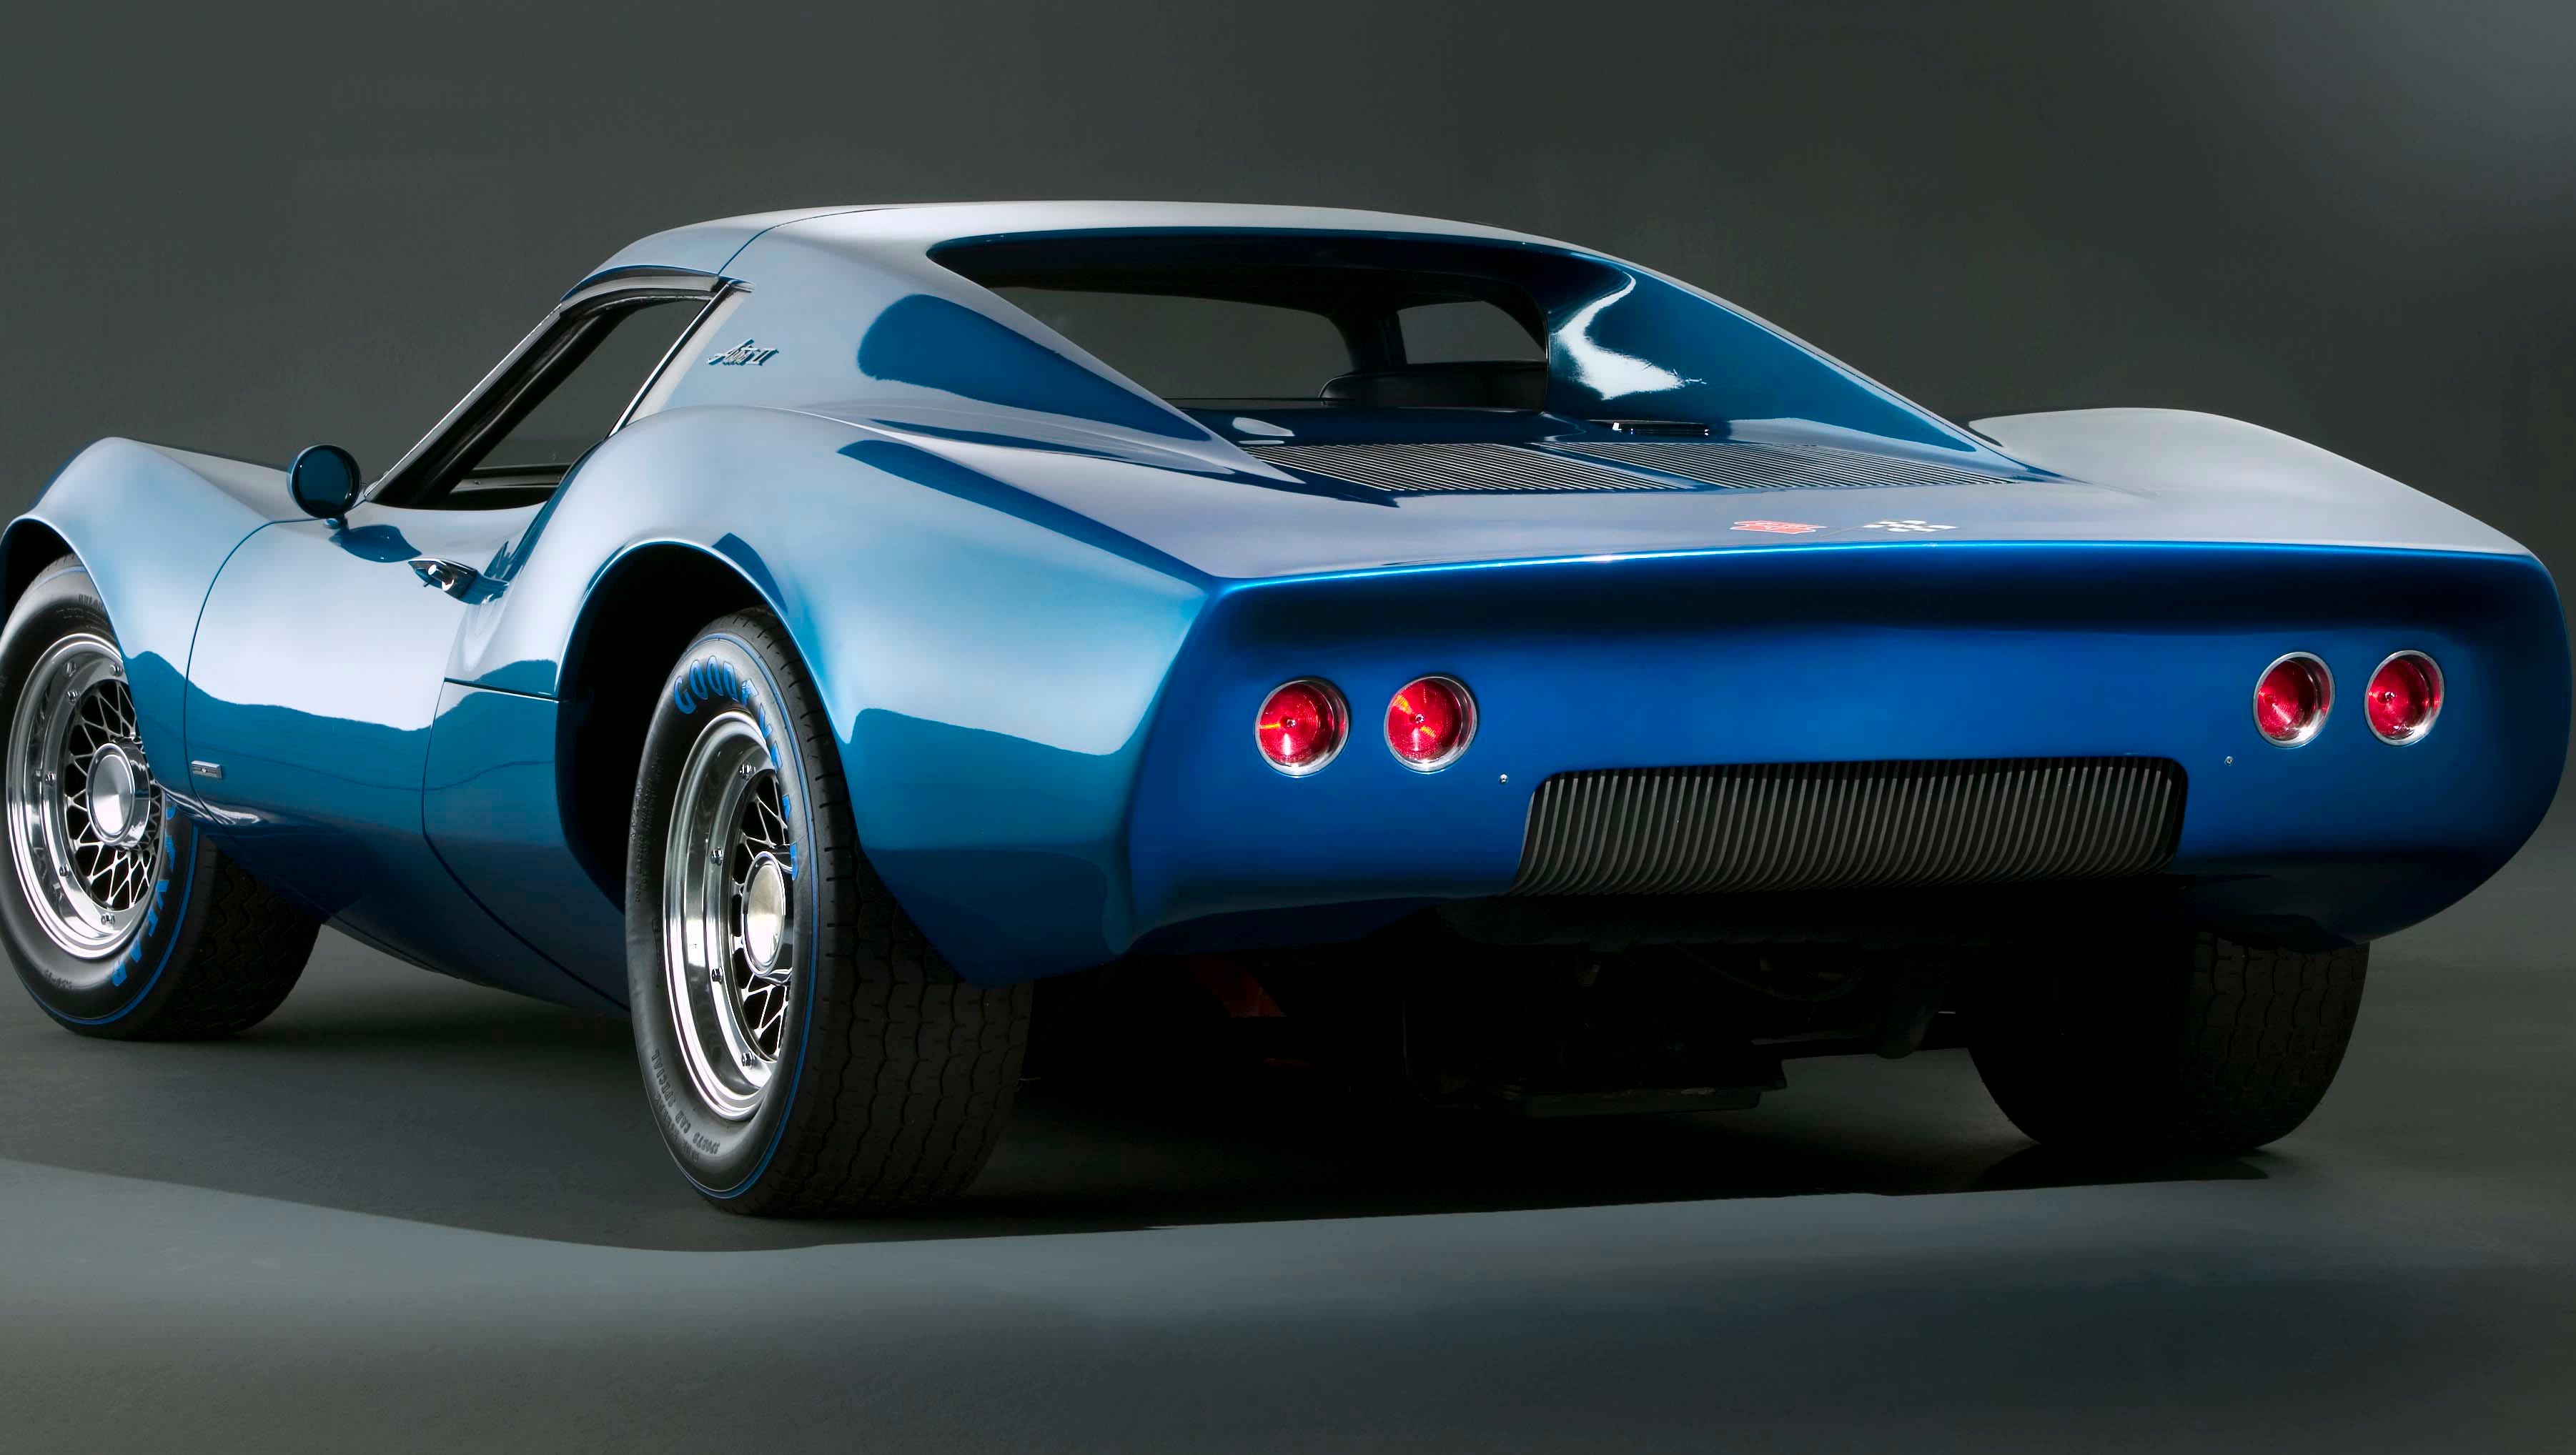 The mid-engine Corvette concept has a long design history. The Astro II concept was introduced at the 1968 New York Auto Show. Lead engineer Zora Arkus-Duntov and GM styling chief Bill Mitchell hoped the Astro would become the next-generation Corvette, but GM management decided the public was not ready for a mid-engine car.